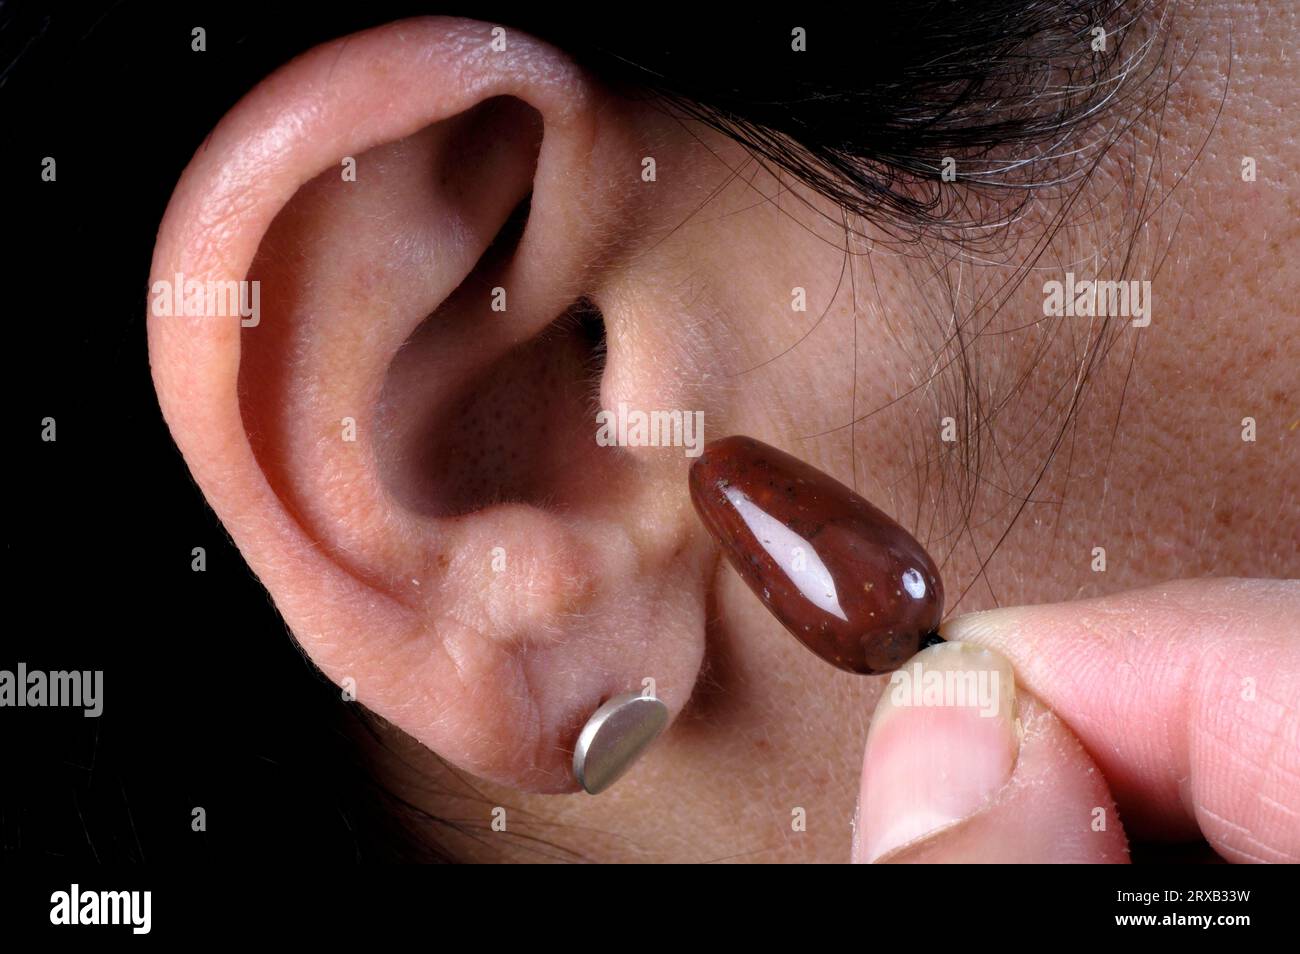 Ear olive from heliotrope, buzzing ear, ringing in the ears, tinnitus, ringing in the ears Stock Photo